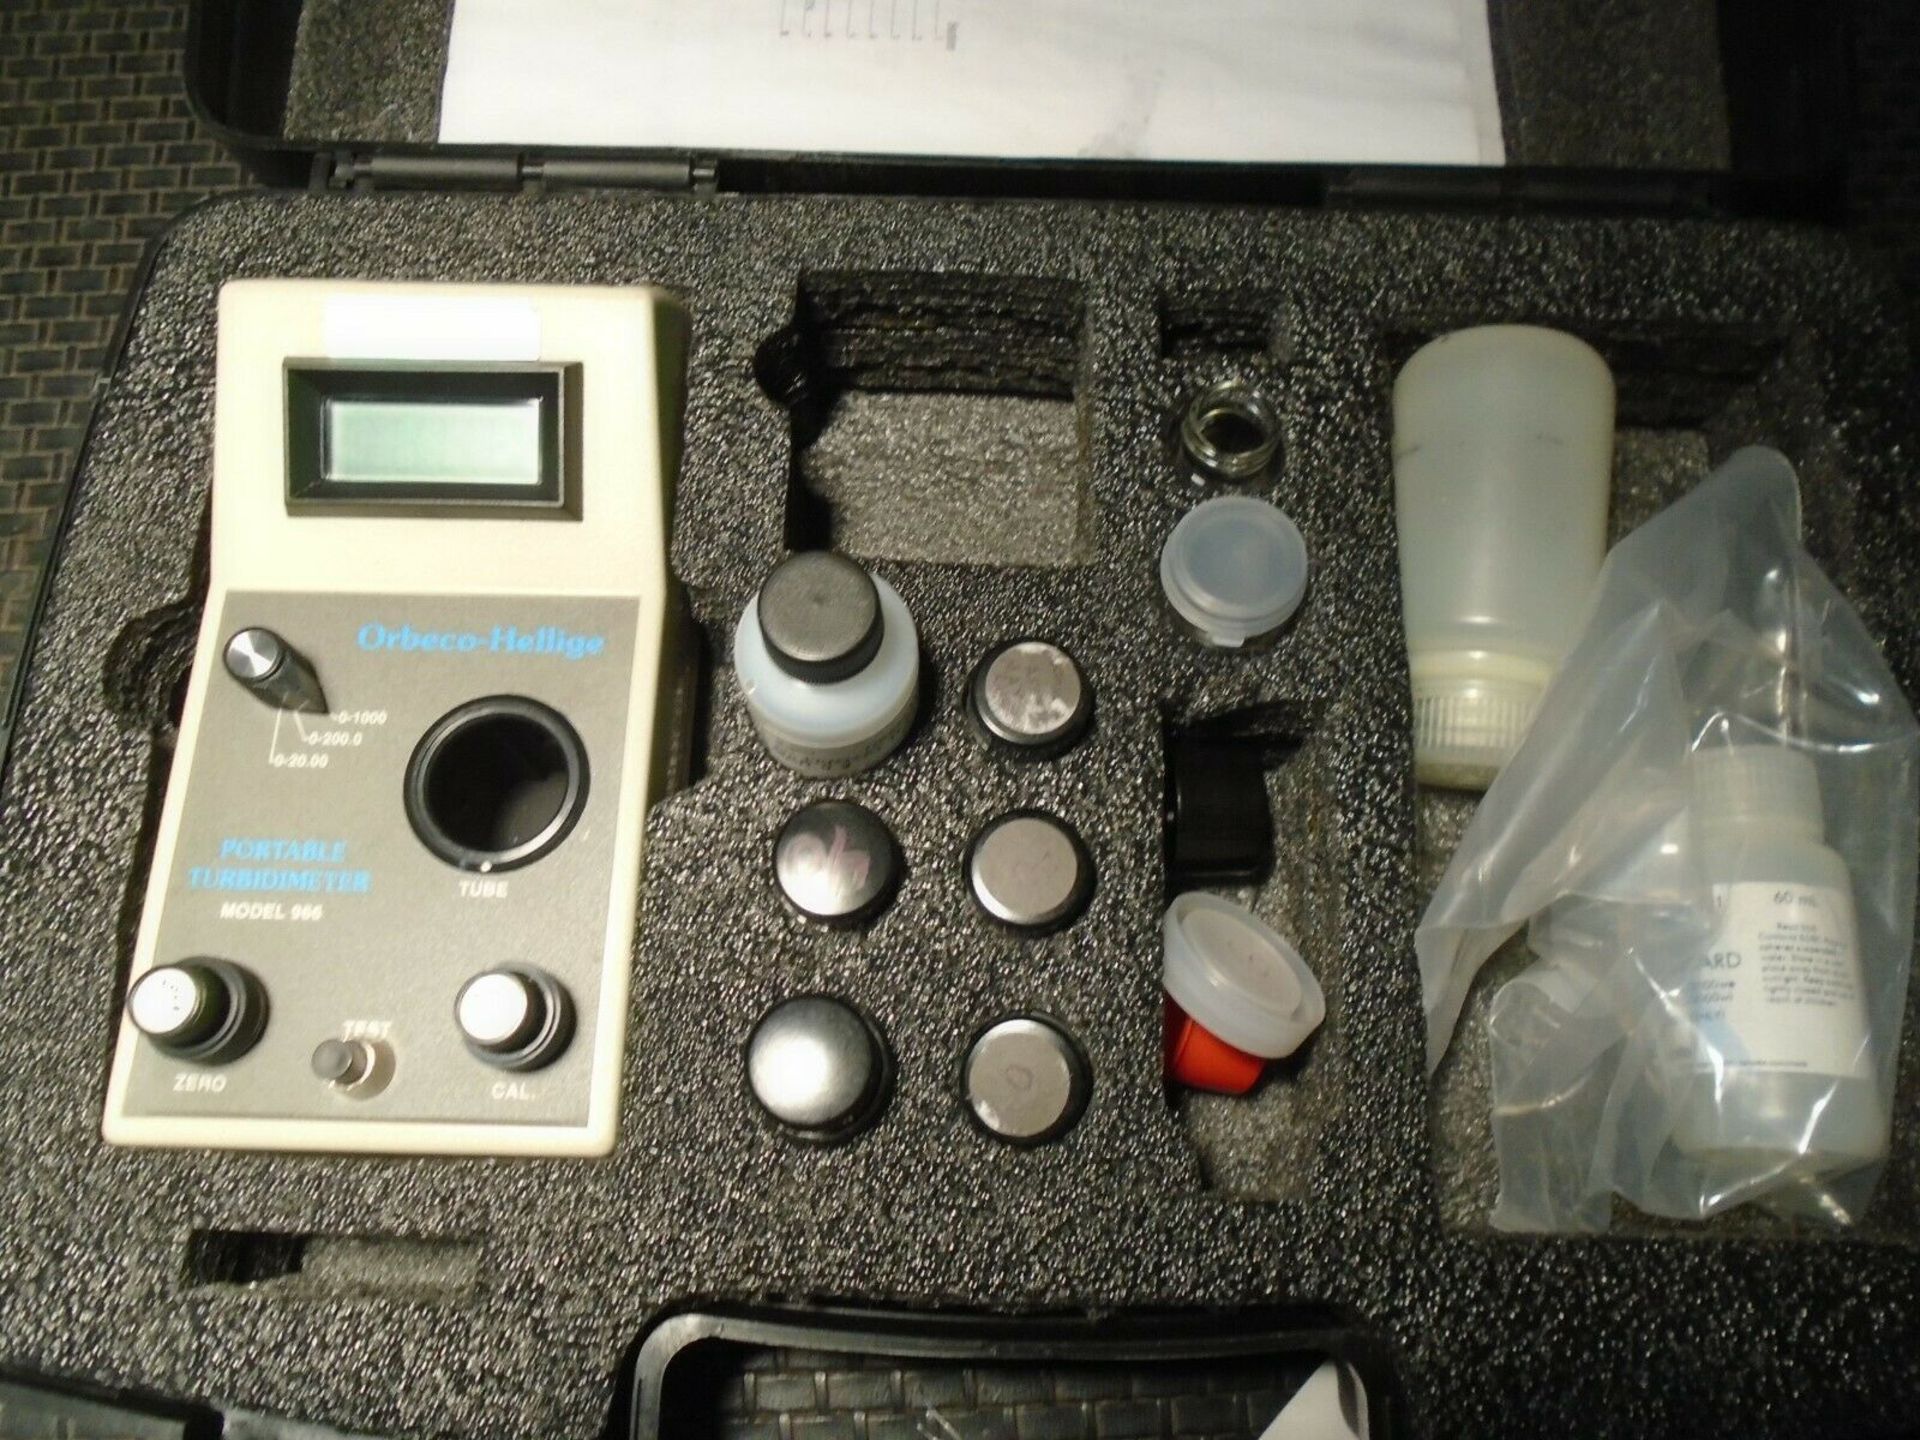 Orbeco-Hellige Model 966 Portable Turbidmeter - Image 2 of 3